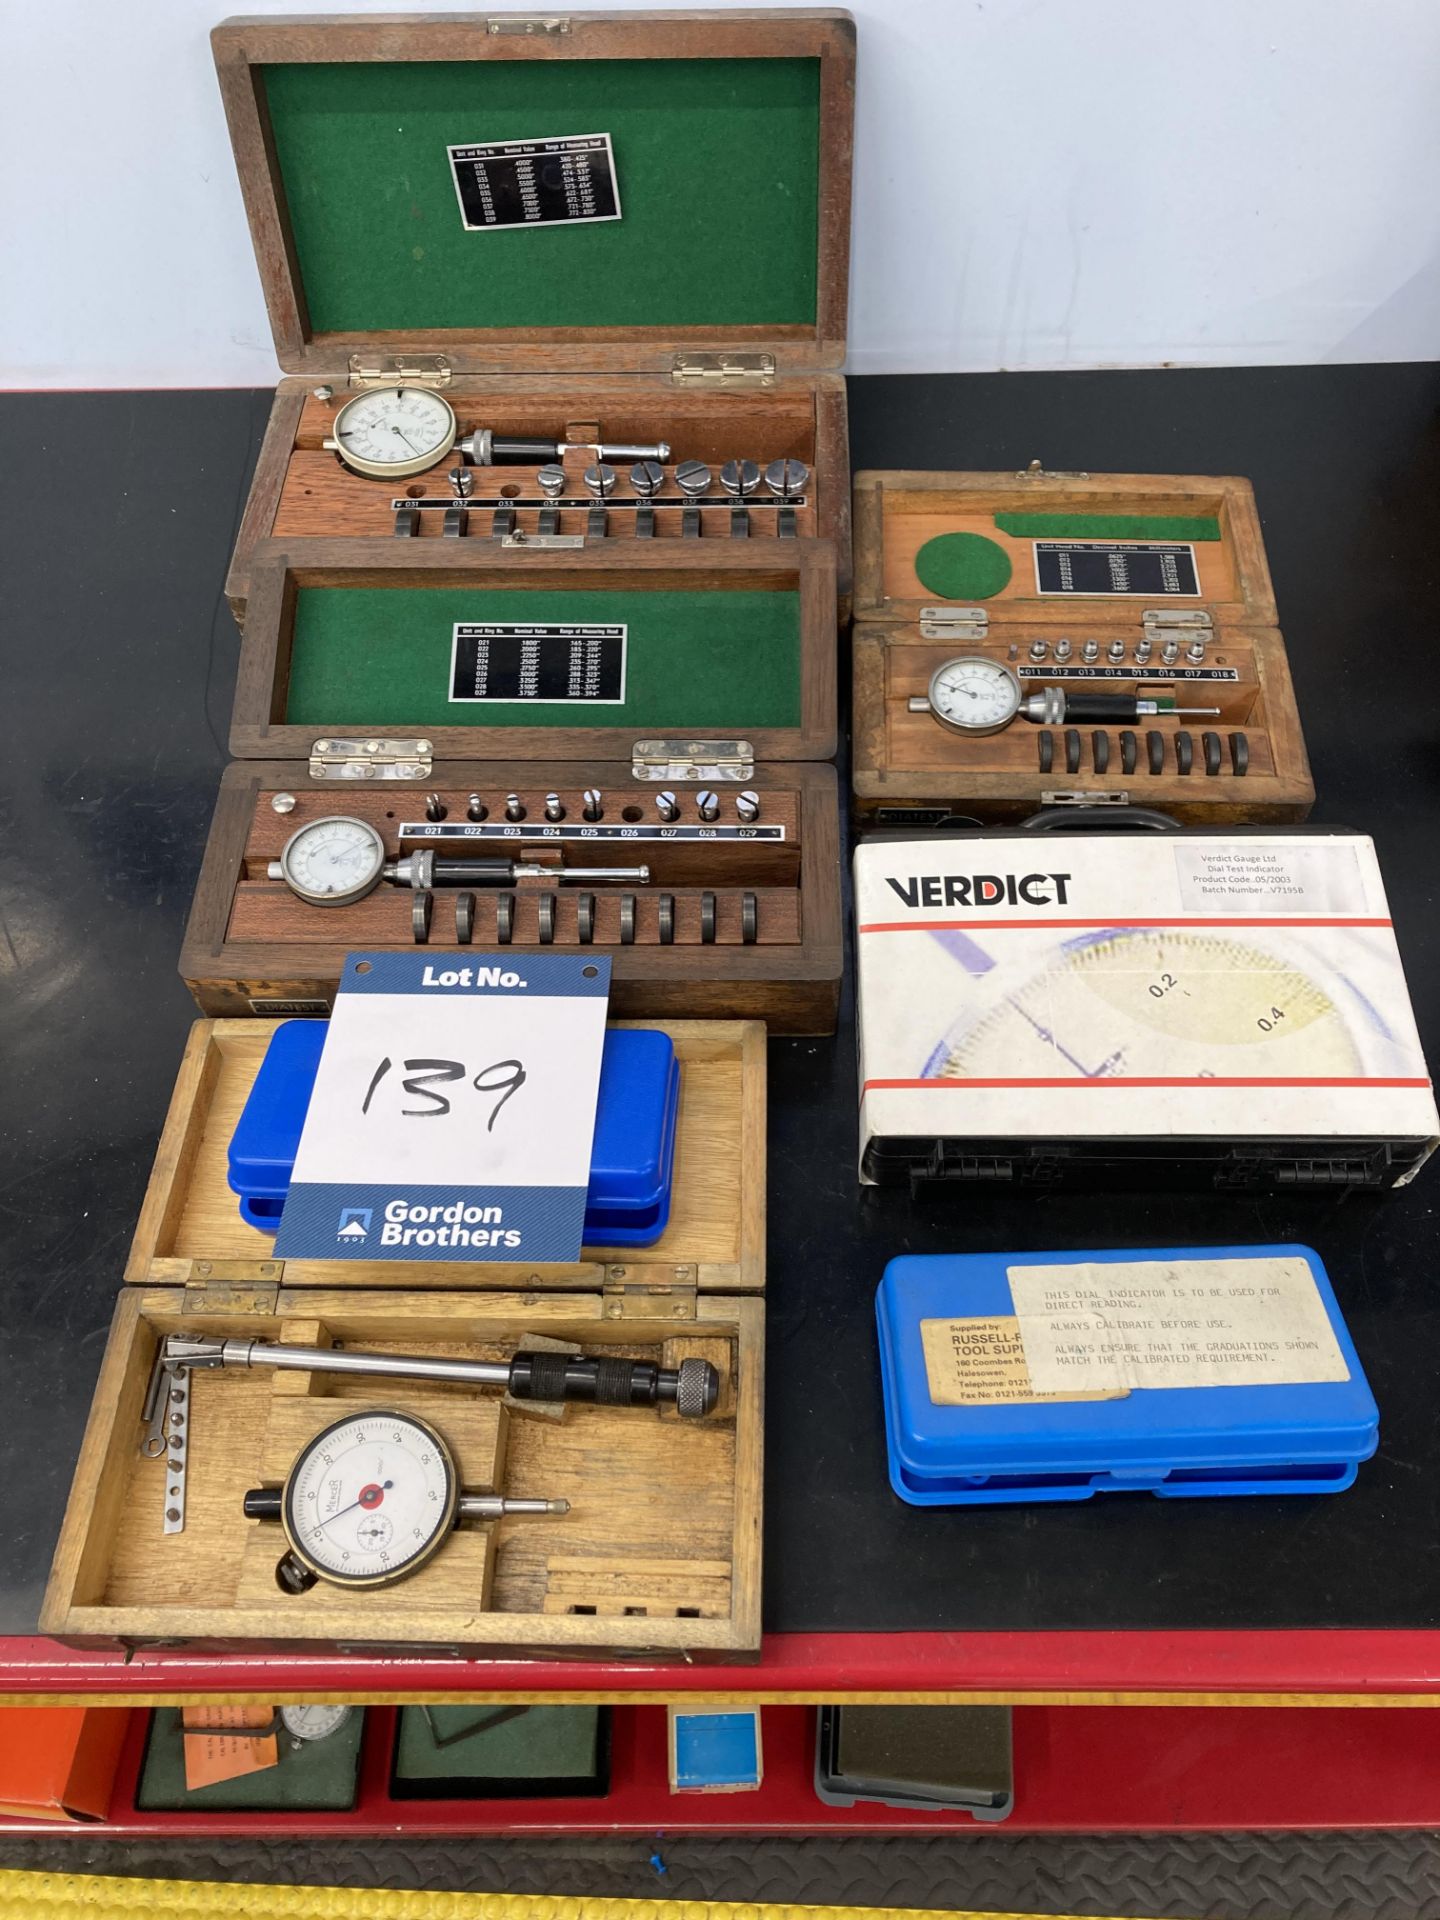 3x Diatest bore gauge test kits (cased), 1x other, Verdict dial test indicator & 1x other